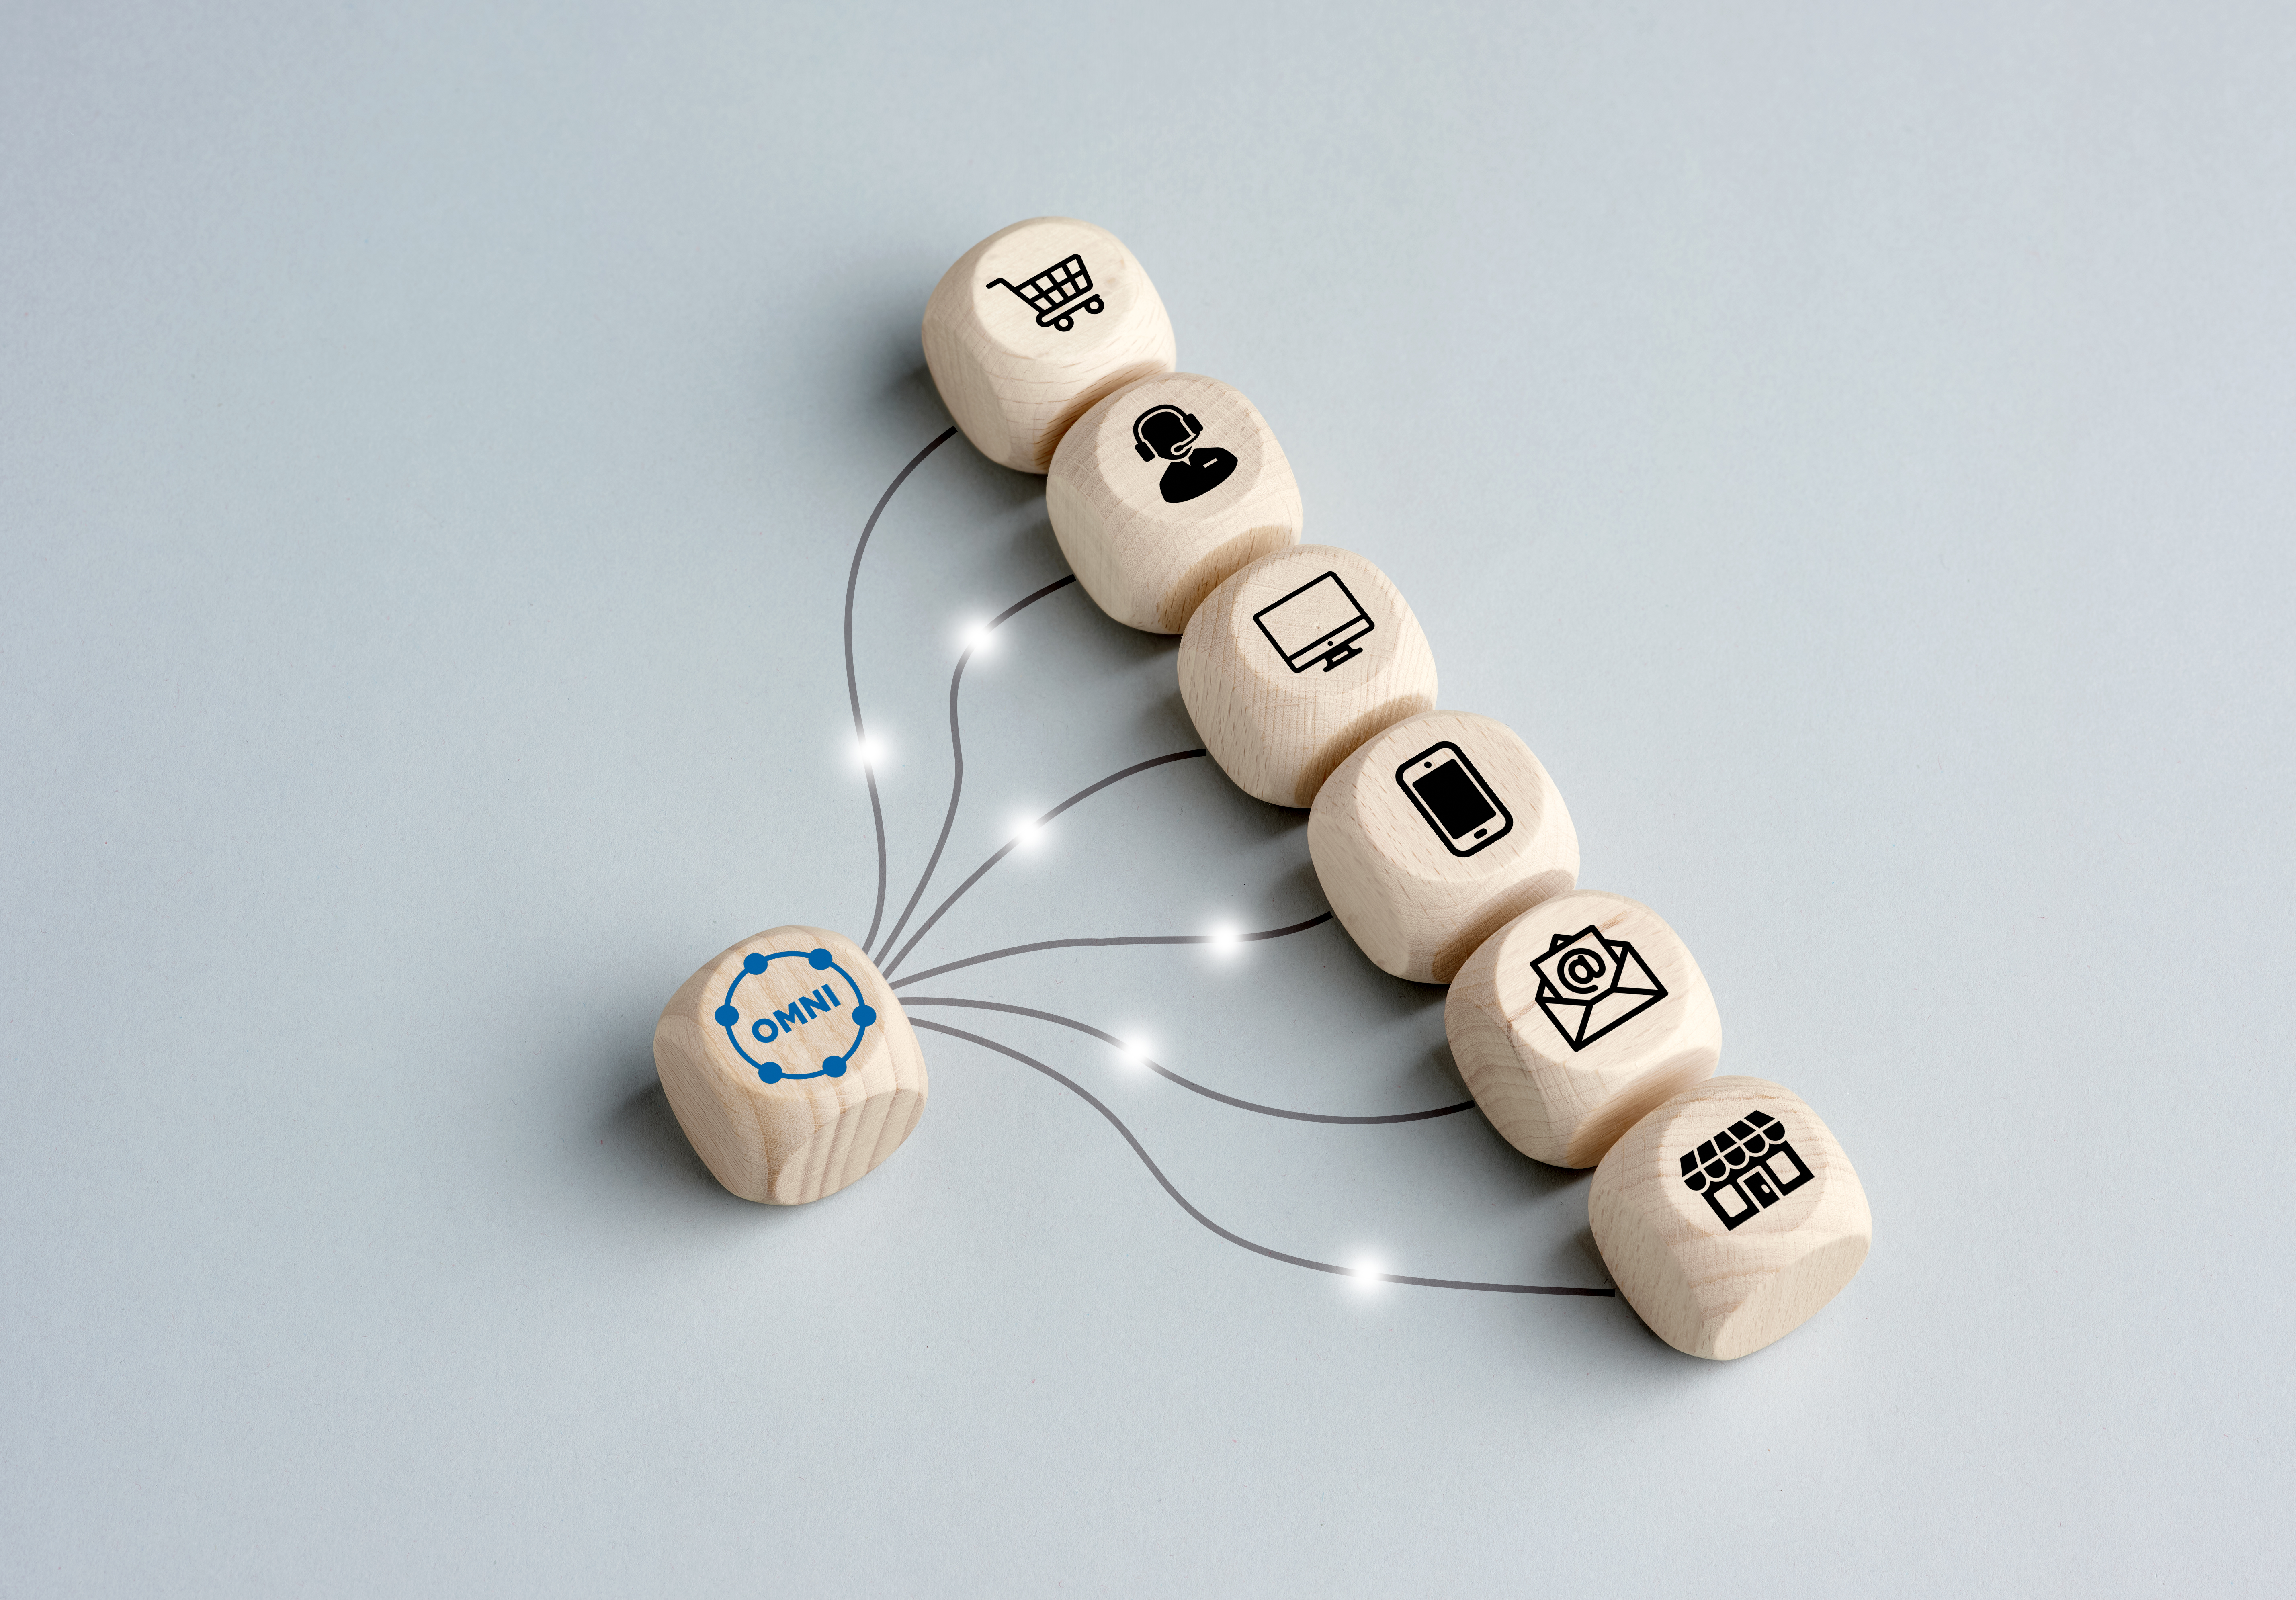 Omnichannel marketing business strategy concept. Digital online marketing and customer engagement by integrated channels. Wooden cubes linked with transfer communication lines.